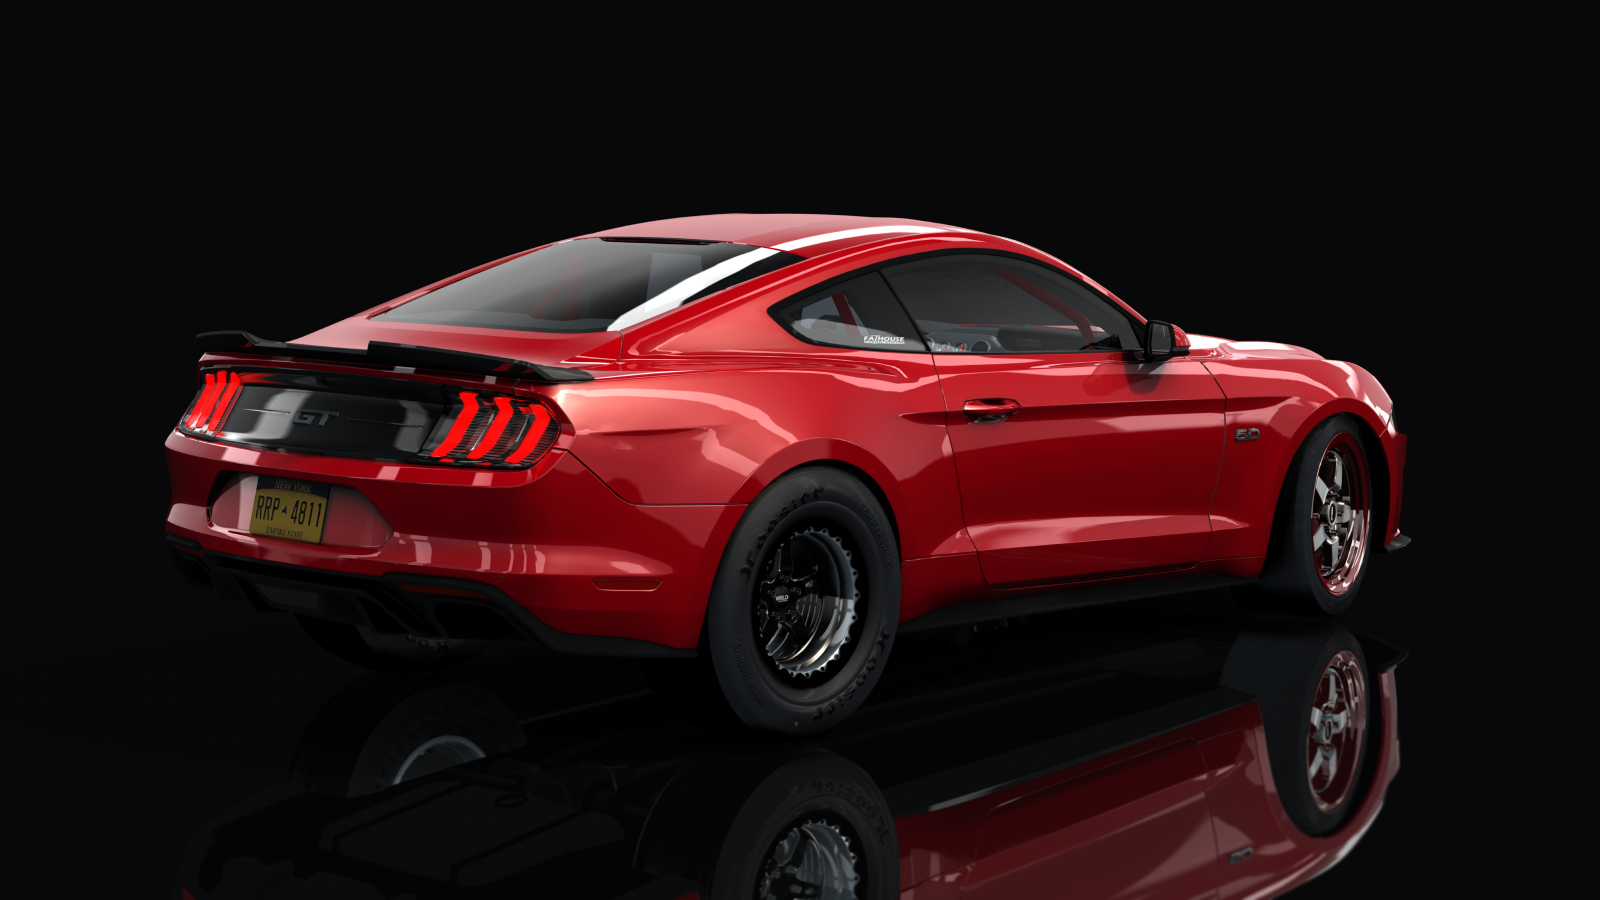 Ford Mustang GT 2018 1500Rx, skin Rapid_Red